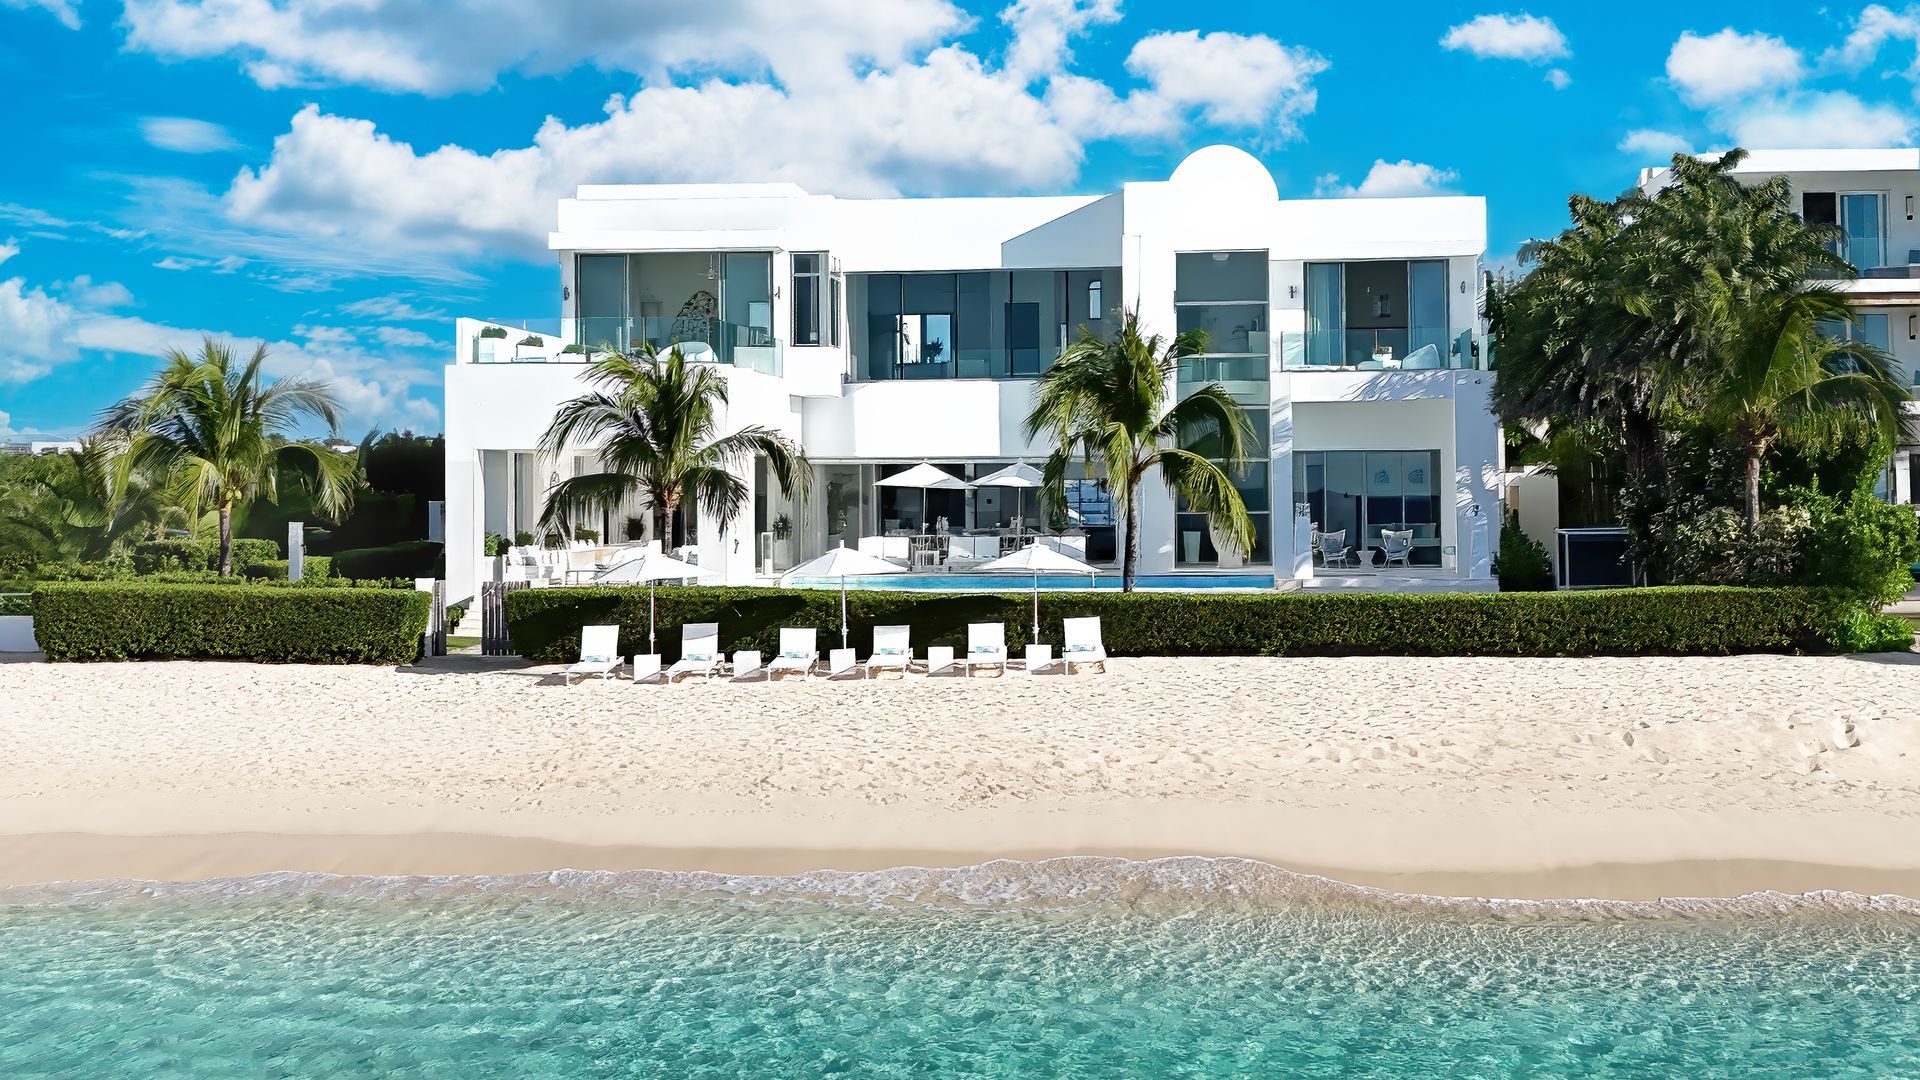 The Beach House, Anguilla. Photo by ENVISIONWORKS